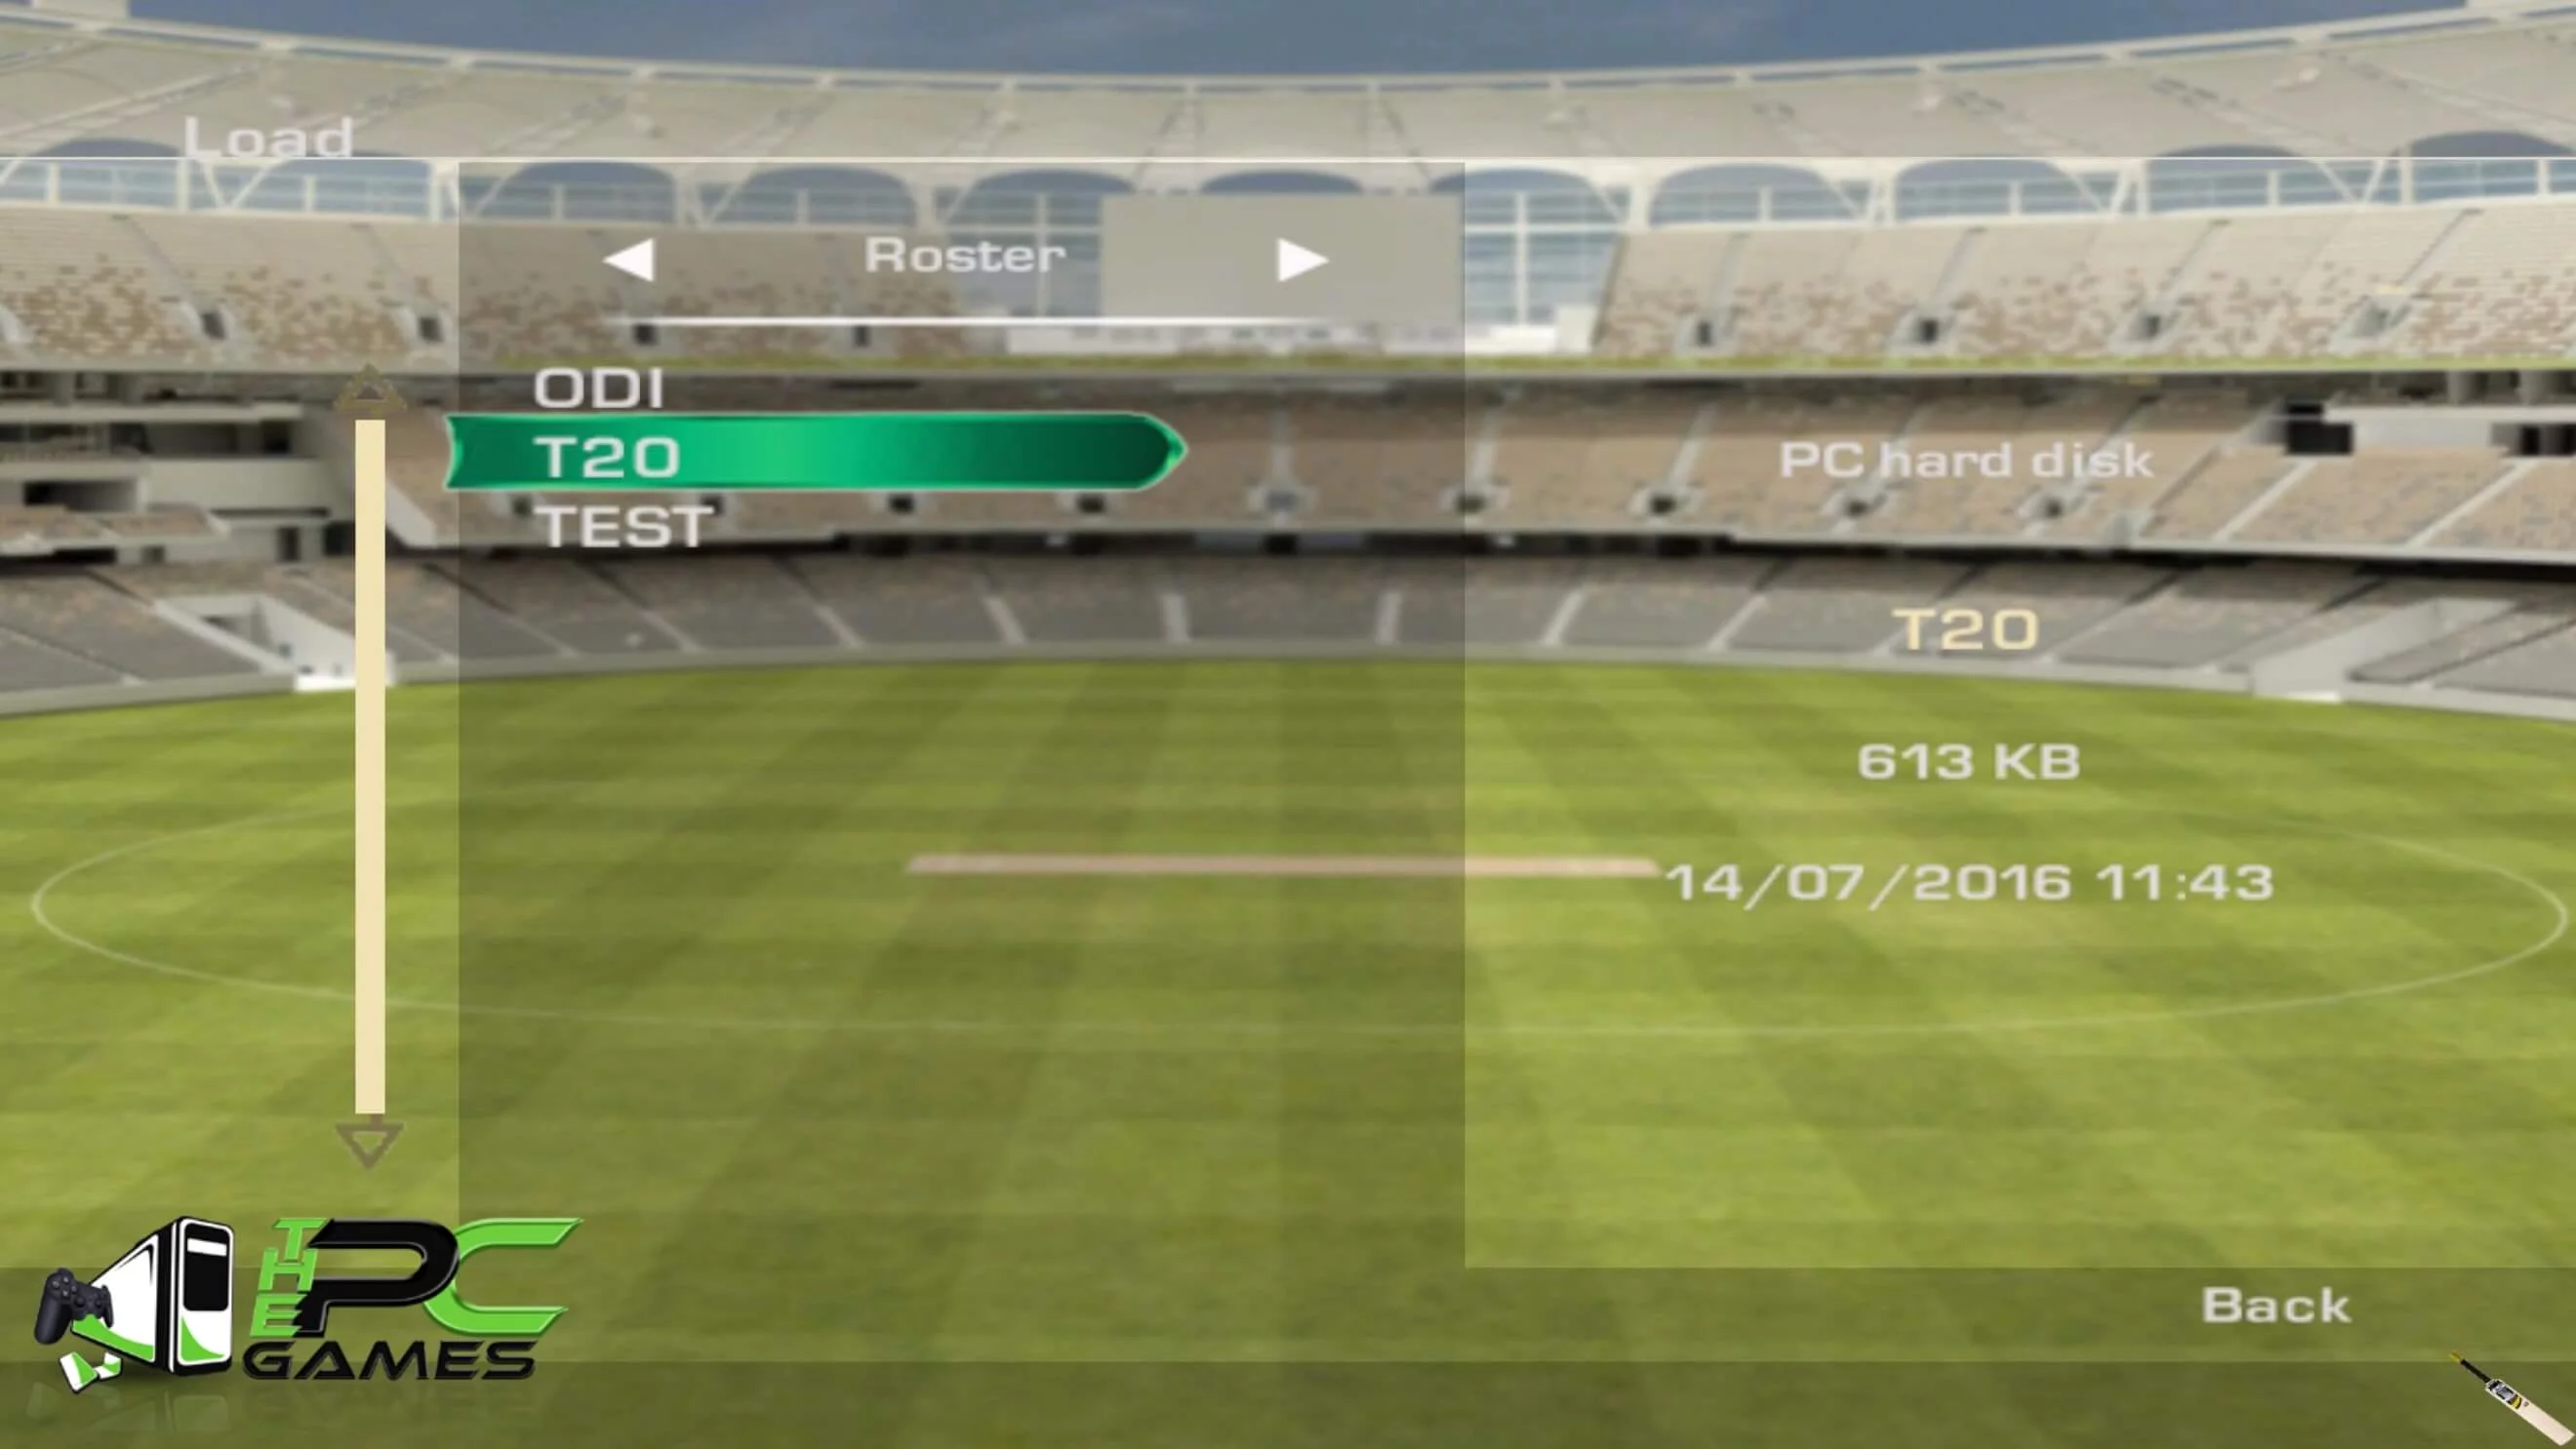 How to Load Roster (T20-ODI-Test) Tutorial (4)